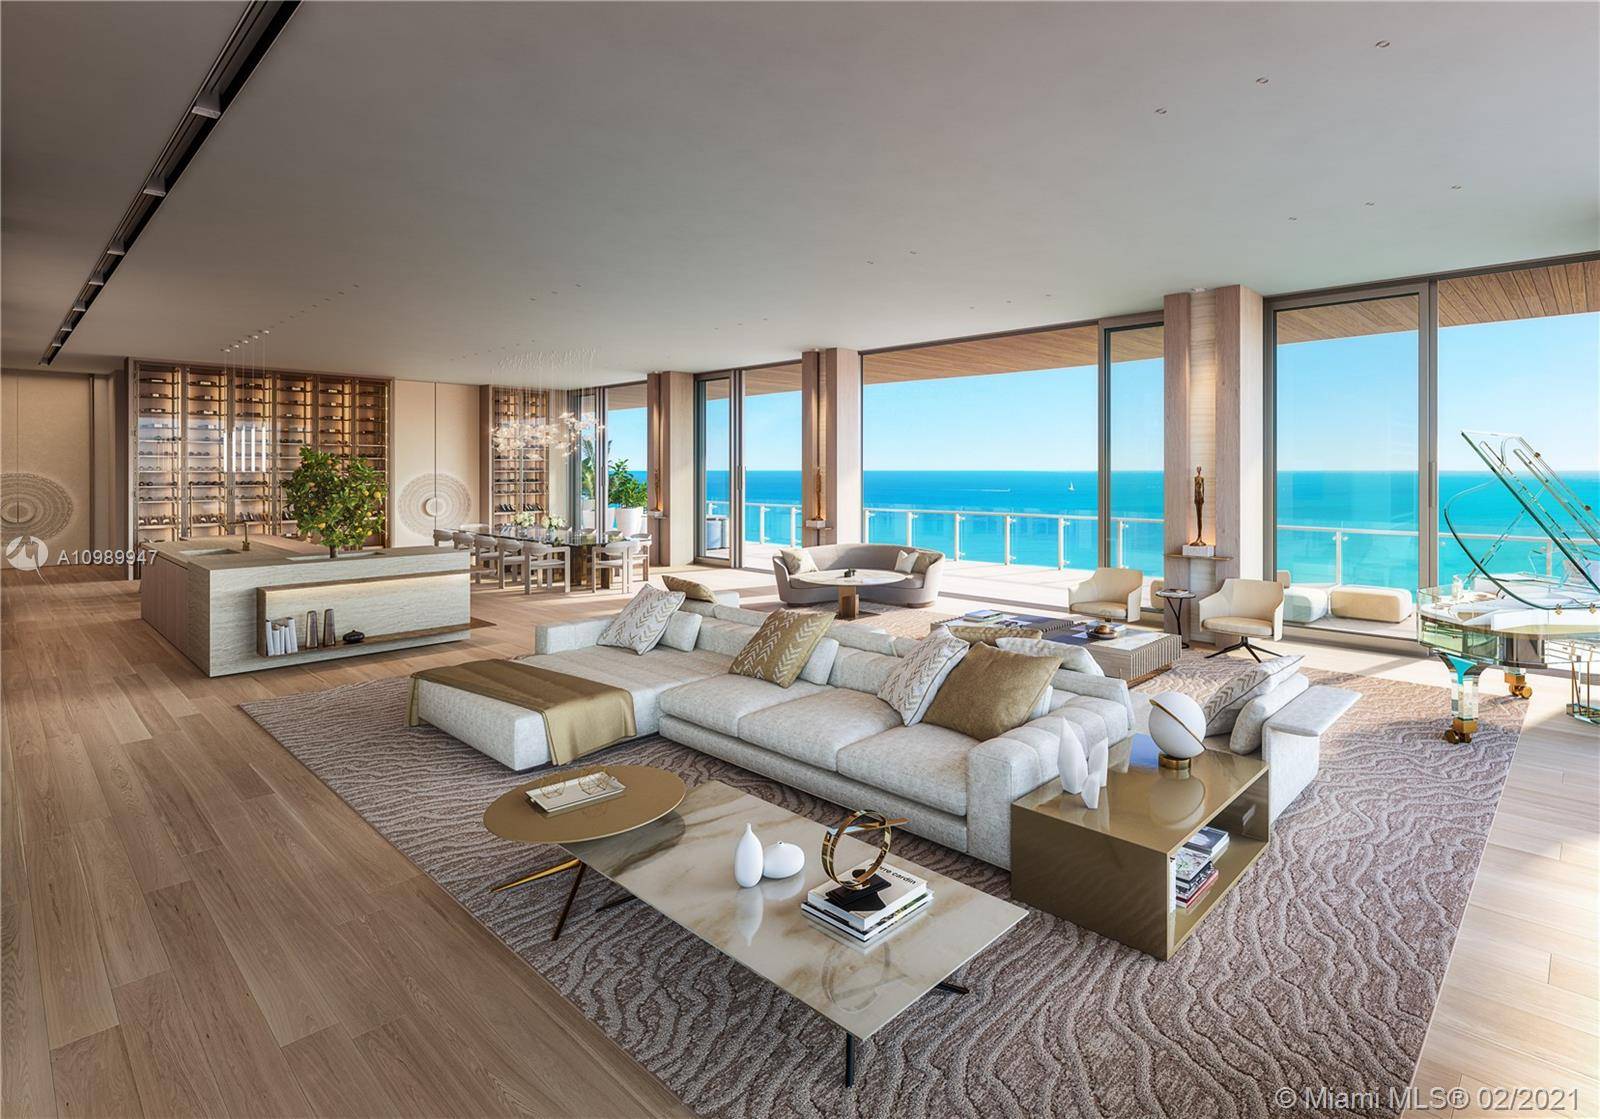 Inspiration lives well at the 57 Ocean Penthouse, where sky, sea and the splendor of Miami Beach unfold across a single, full floor residence like no other.